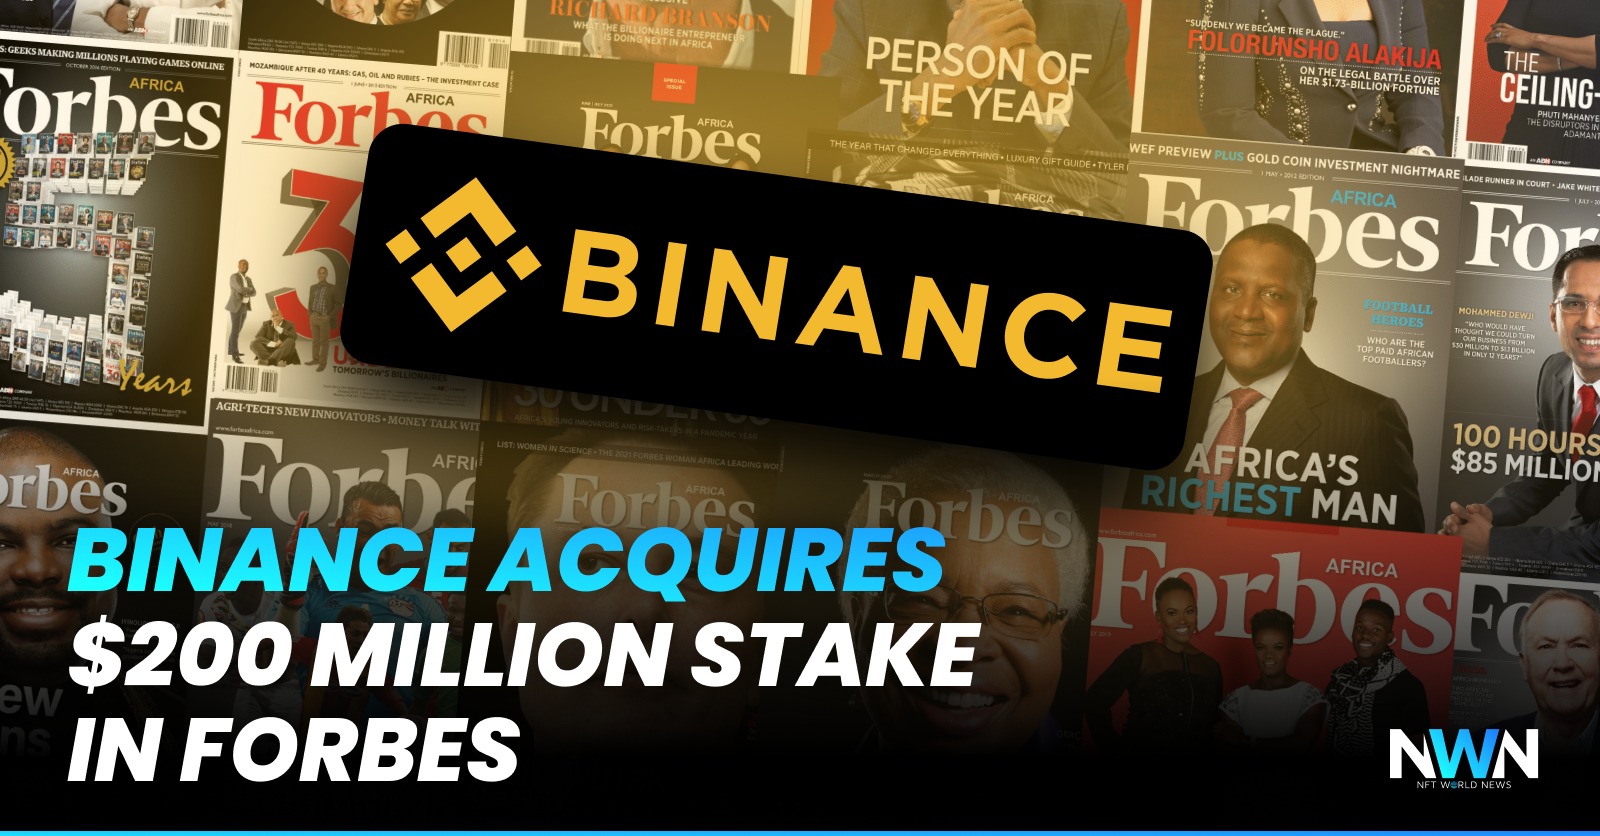 Binance Acquires $200 Million Stake In Forbes